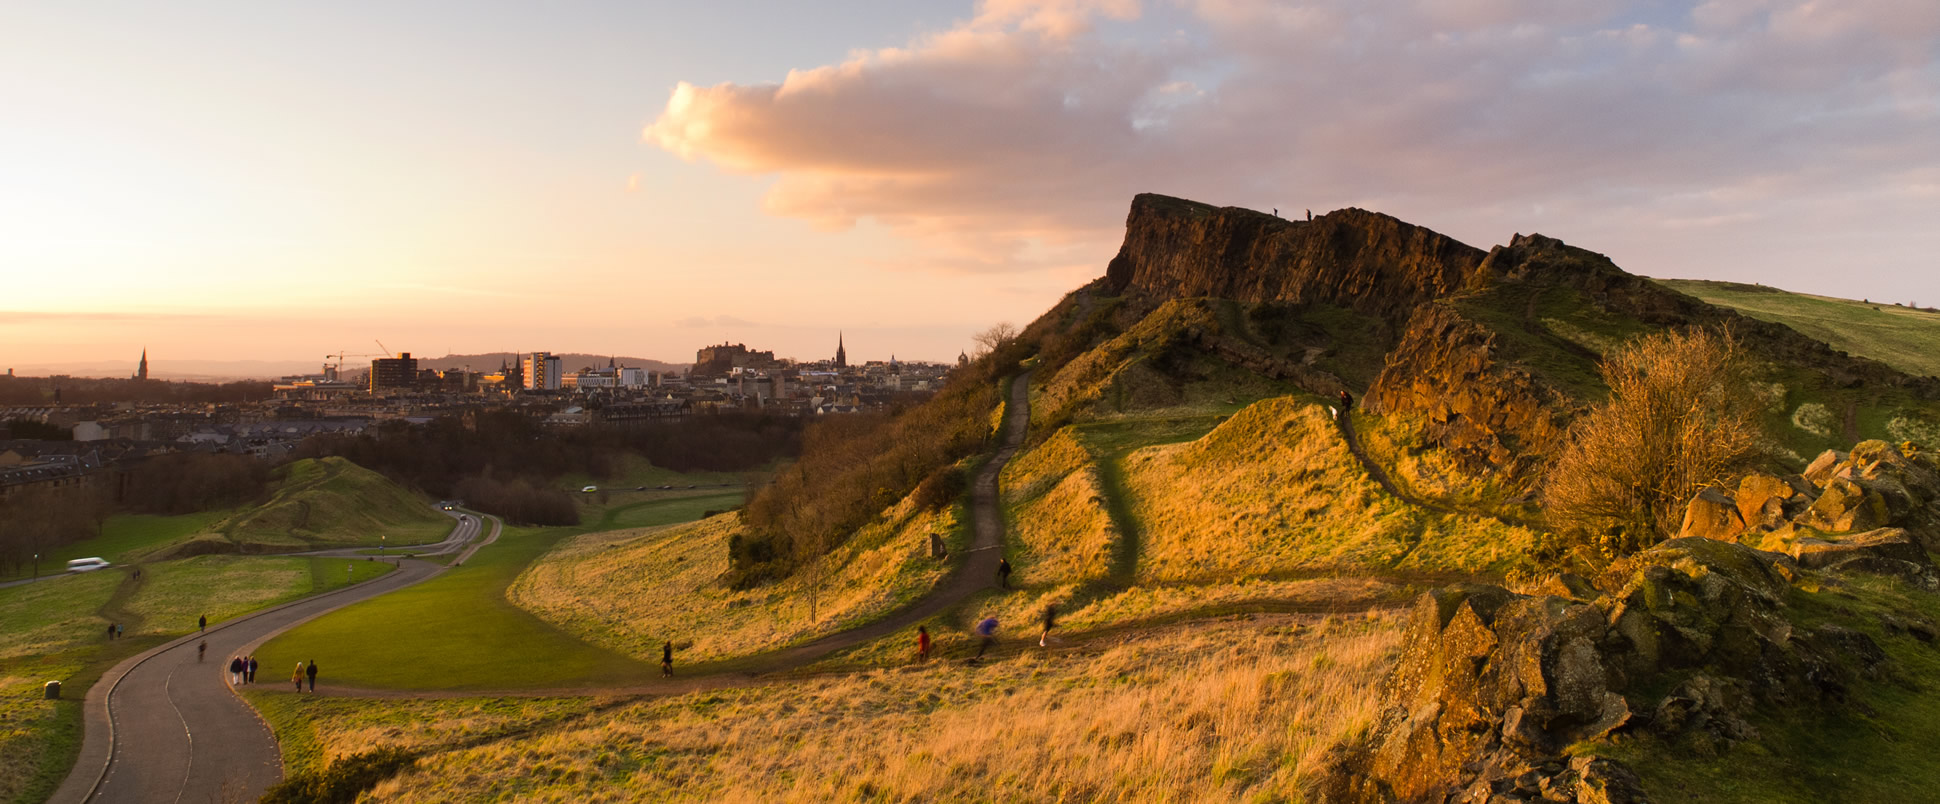 A picture of members of the public enjoying Holyrood Park at dusk.